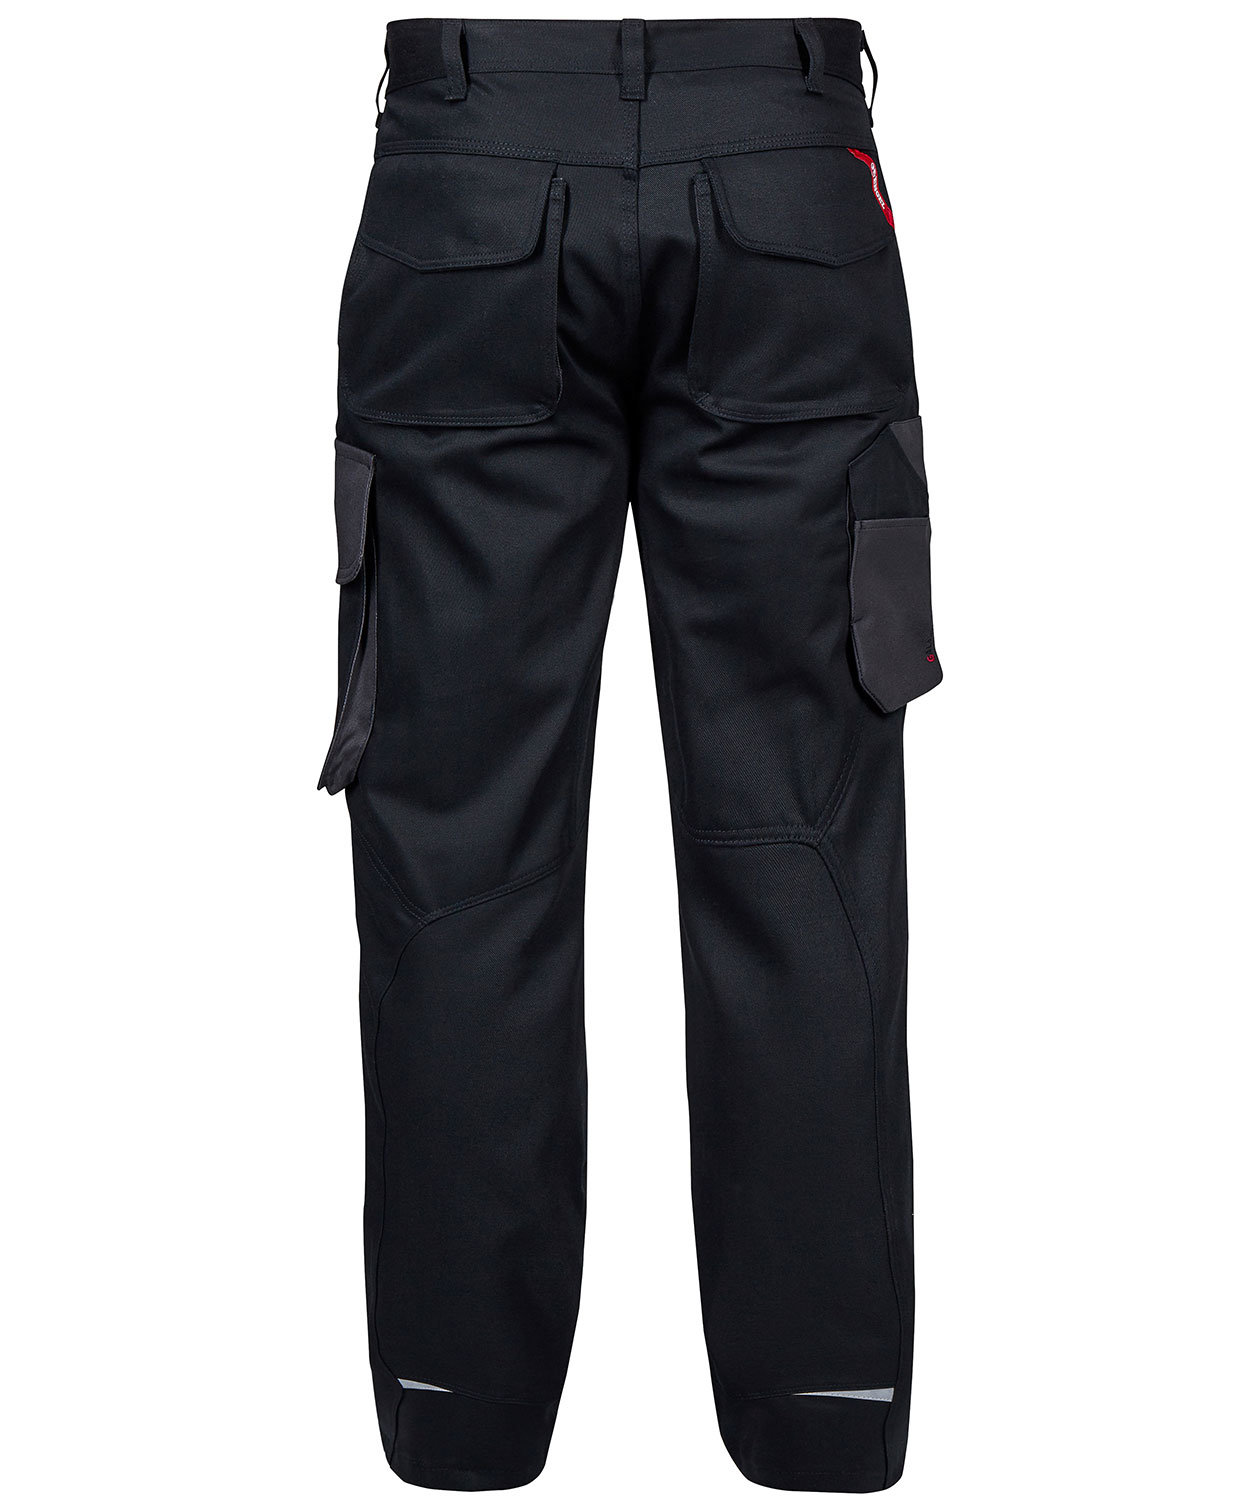 High Quality 100 Cotton Industrial Safety Workwear Multi Pockets Cargo  Pants With Cordura Knee Protection ManufacturerSupplierWholesaler from  Erode